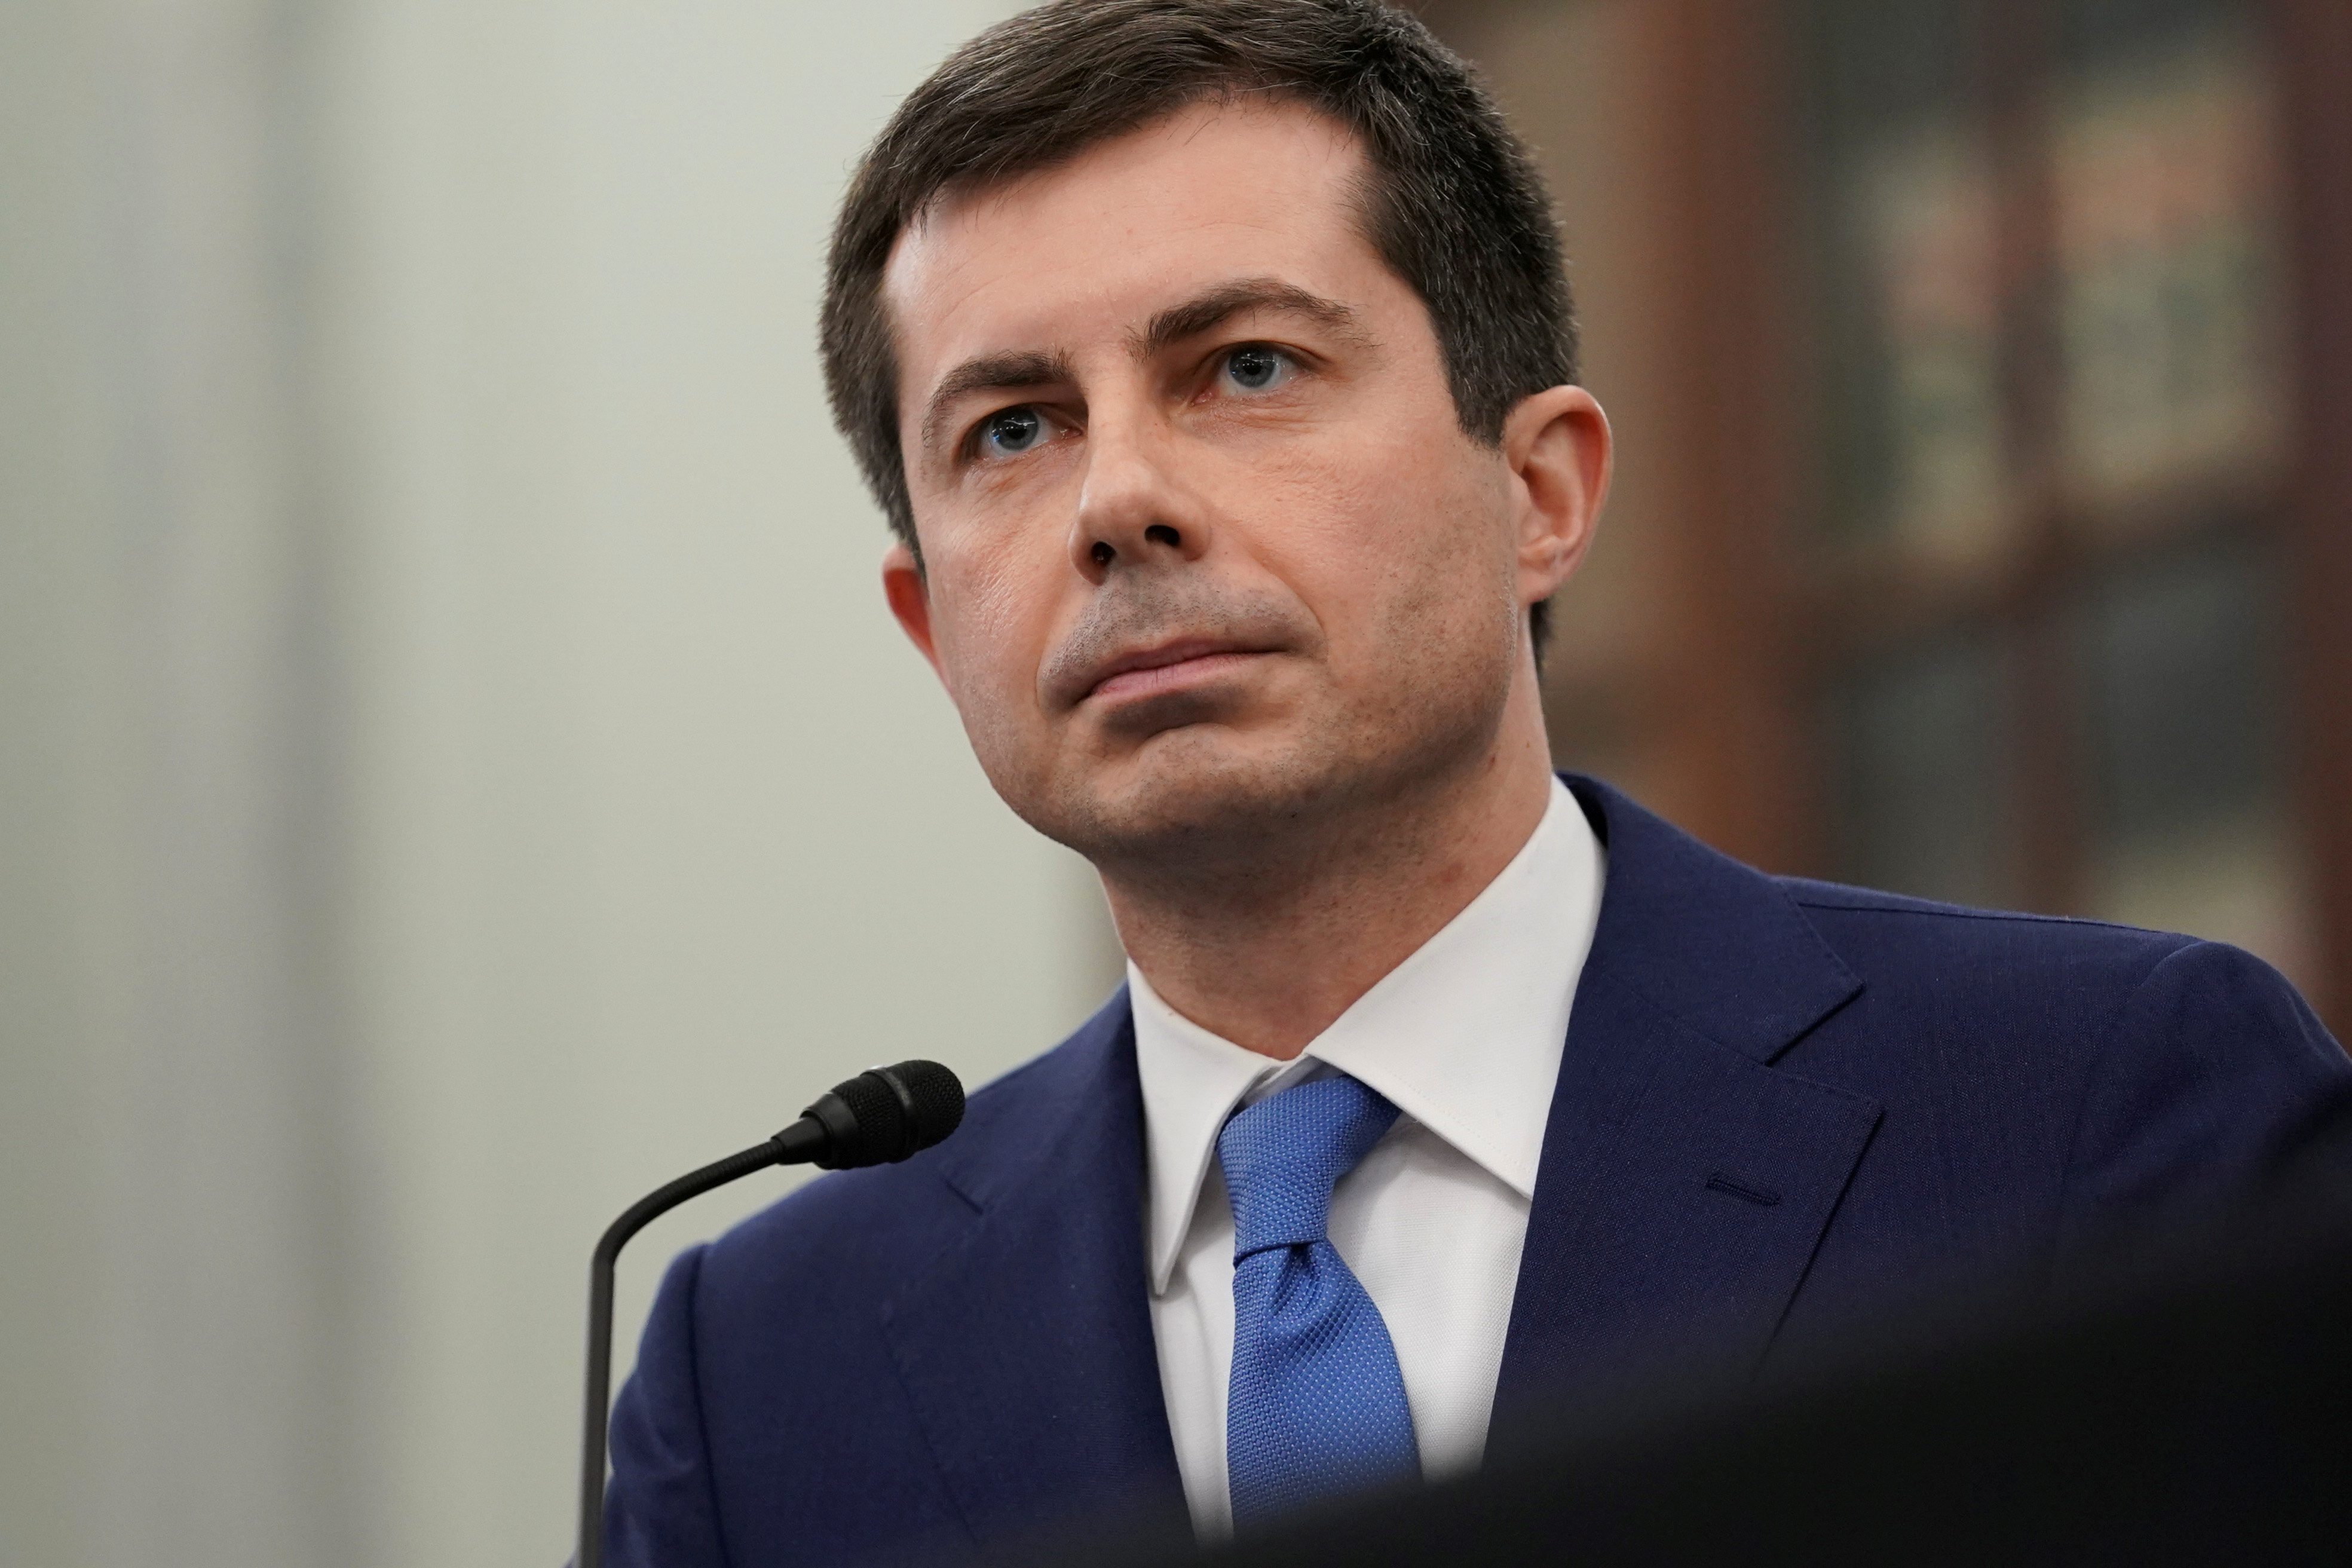 Pete Buttigieg becomes first openly gay cabinet secretary confirmed by US Senate